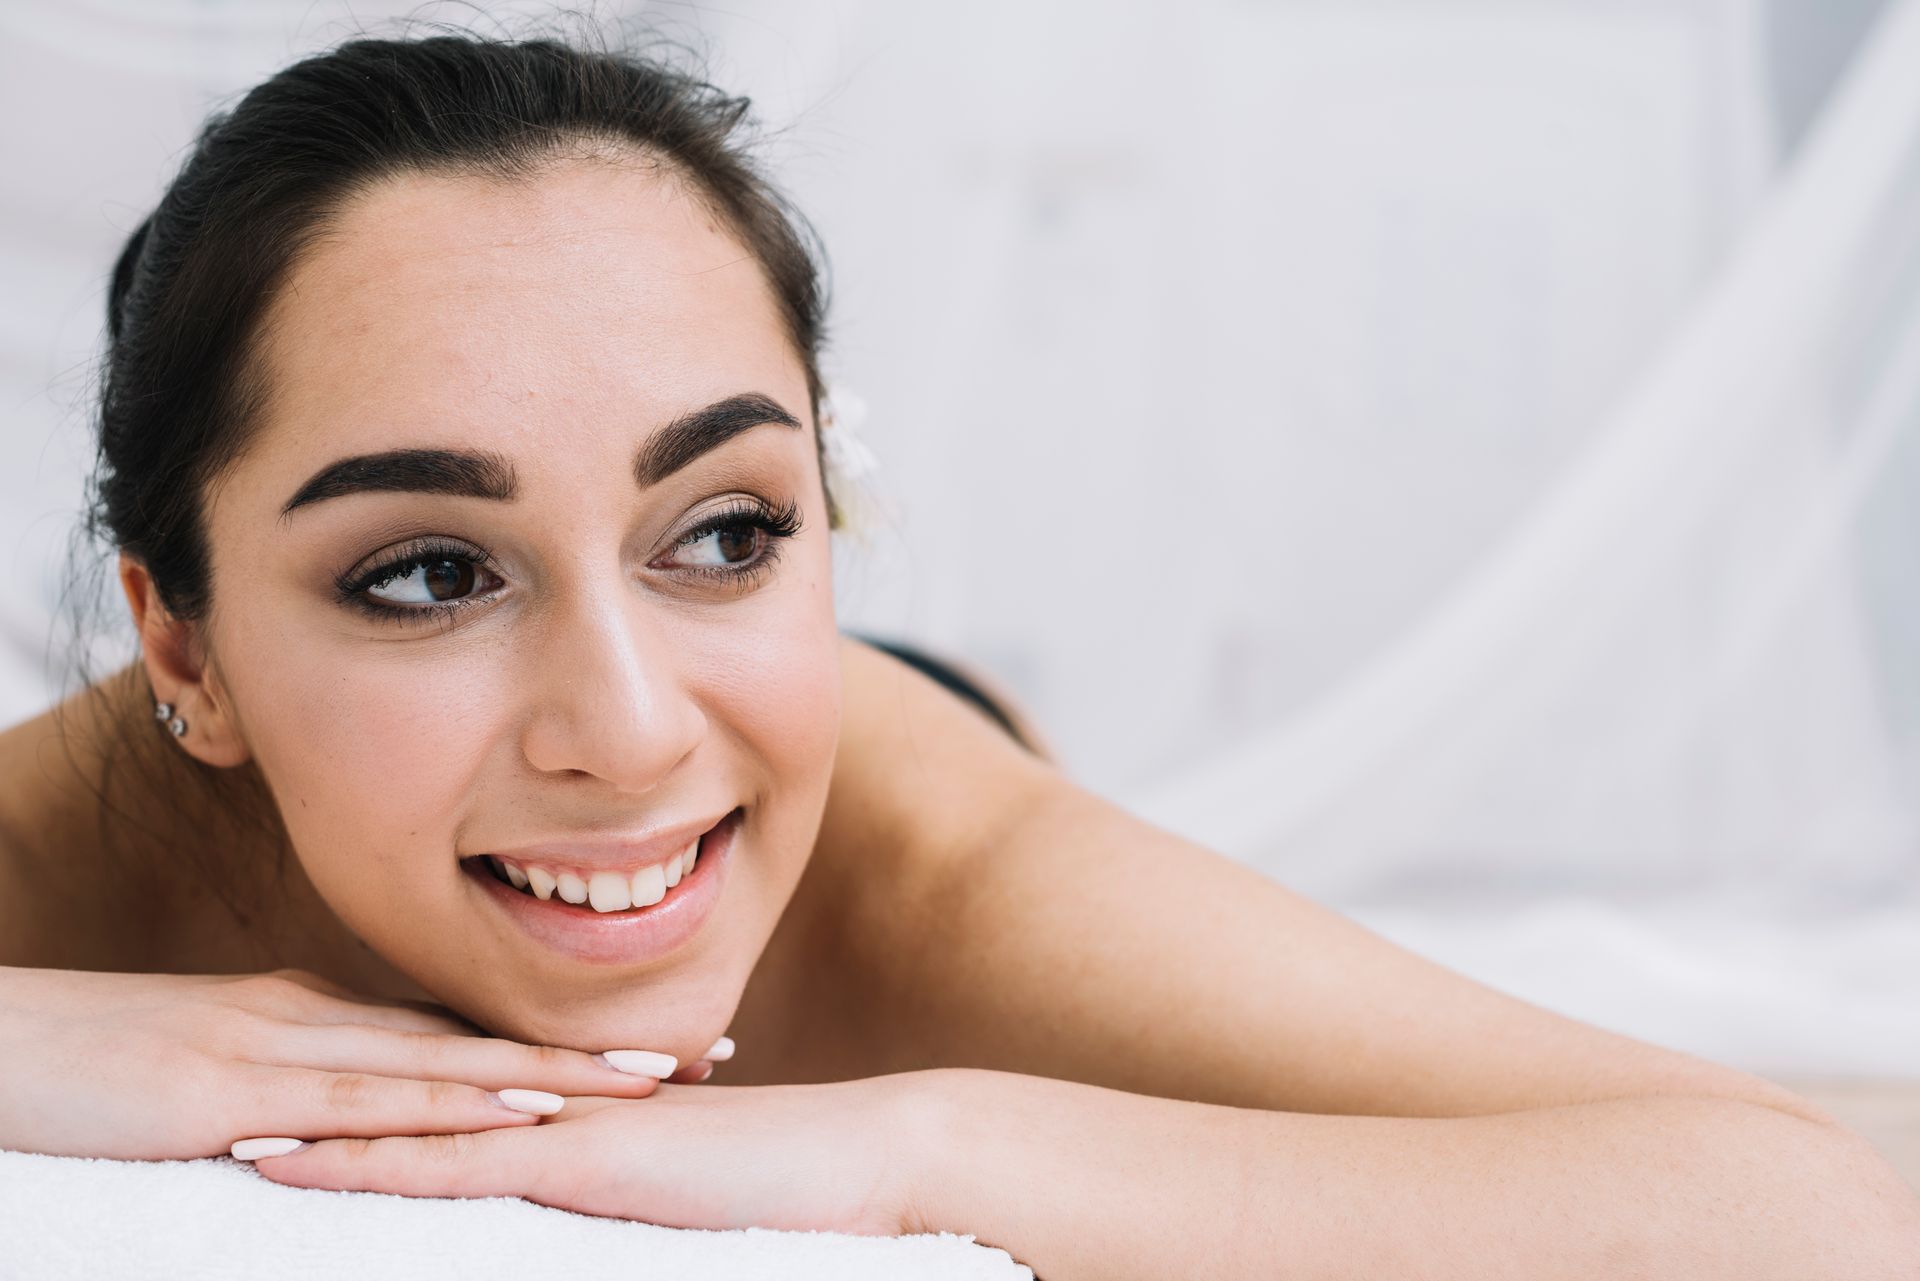 A woman is laying on her stomach on a towel and smiling.